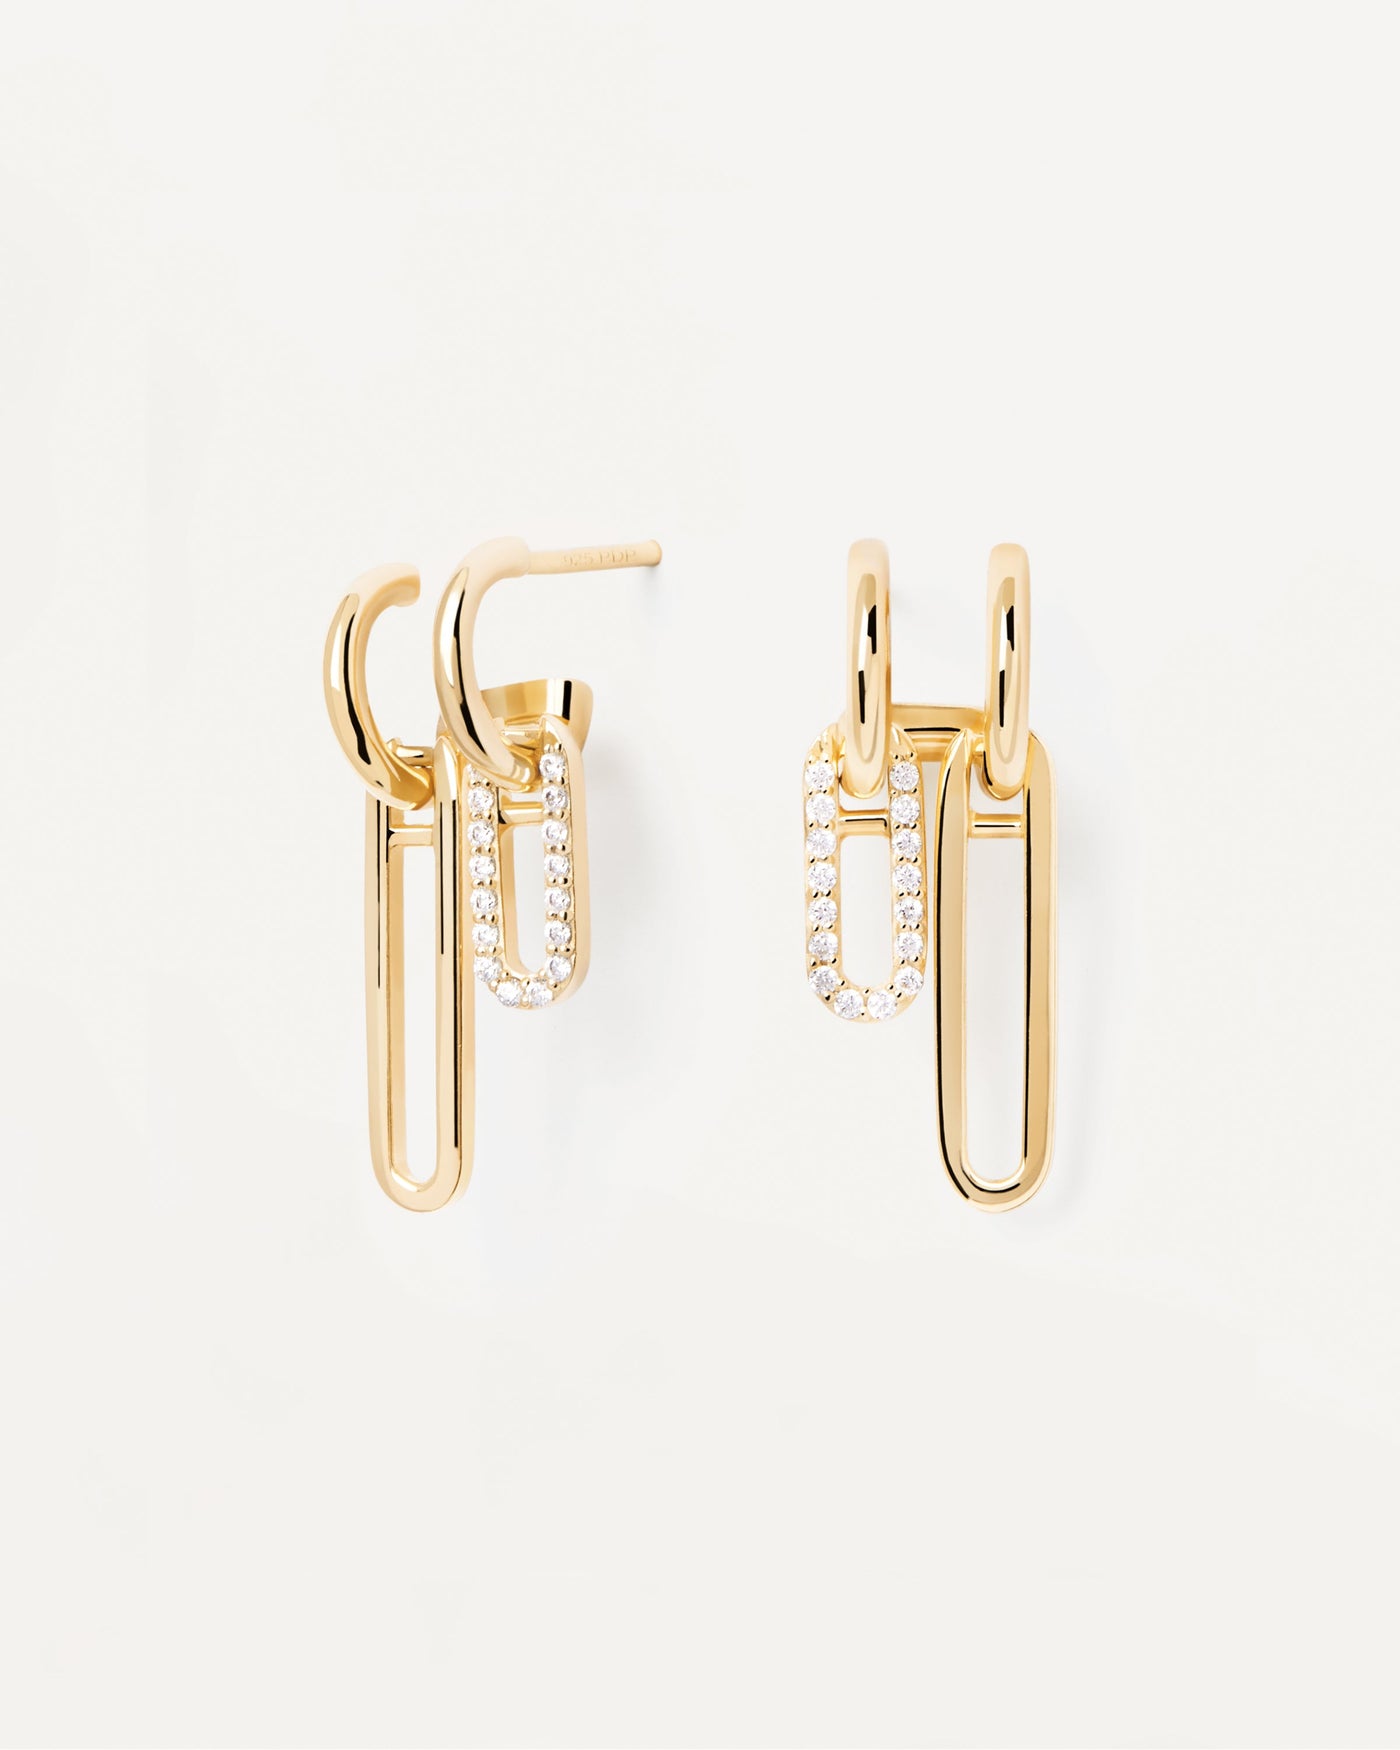 2023 Selection | Nexa Earrings. Asymetric long earrings in gold-plated silver and white zirconia. Get the latest arrival from PDPAOLA. Place your order safely and get this Best Seller. Free Shipping.